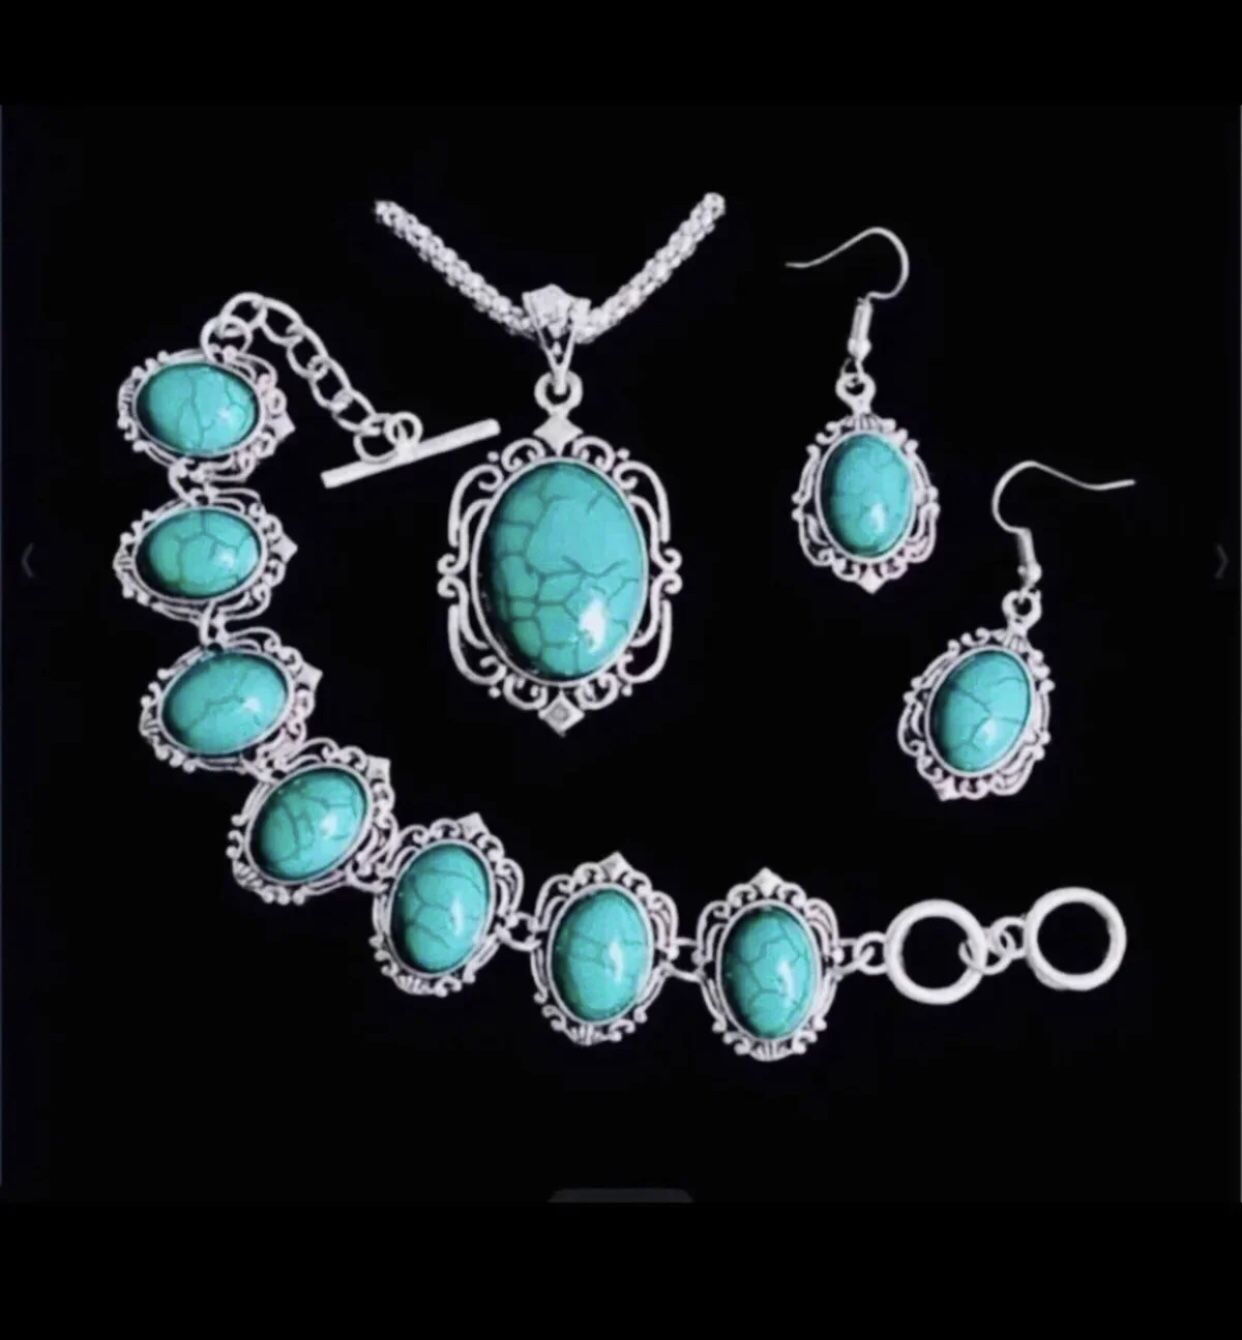 Vintage Tibetan  Turquoise Jewelry Set Necklace Bracelet and Earrings